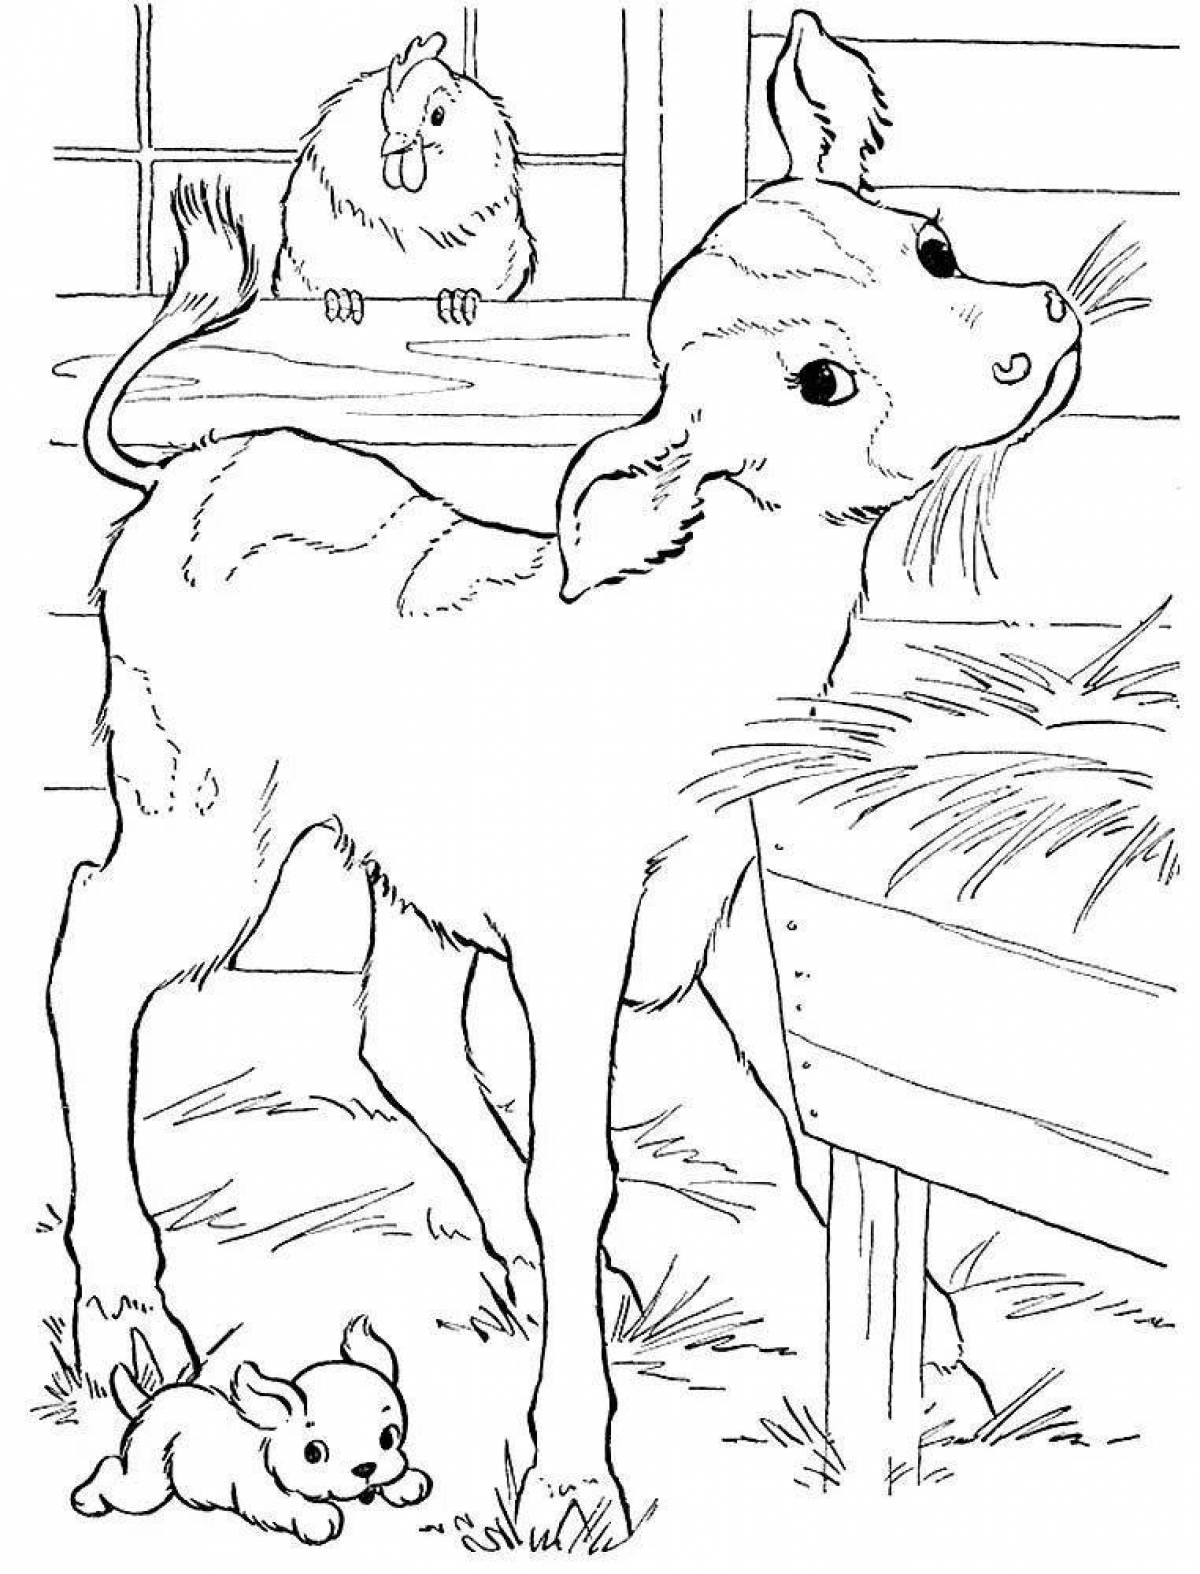 Naughty pet coloring pages